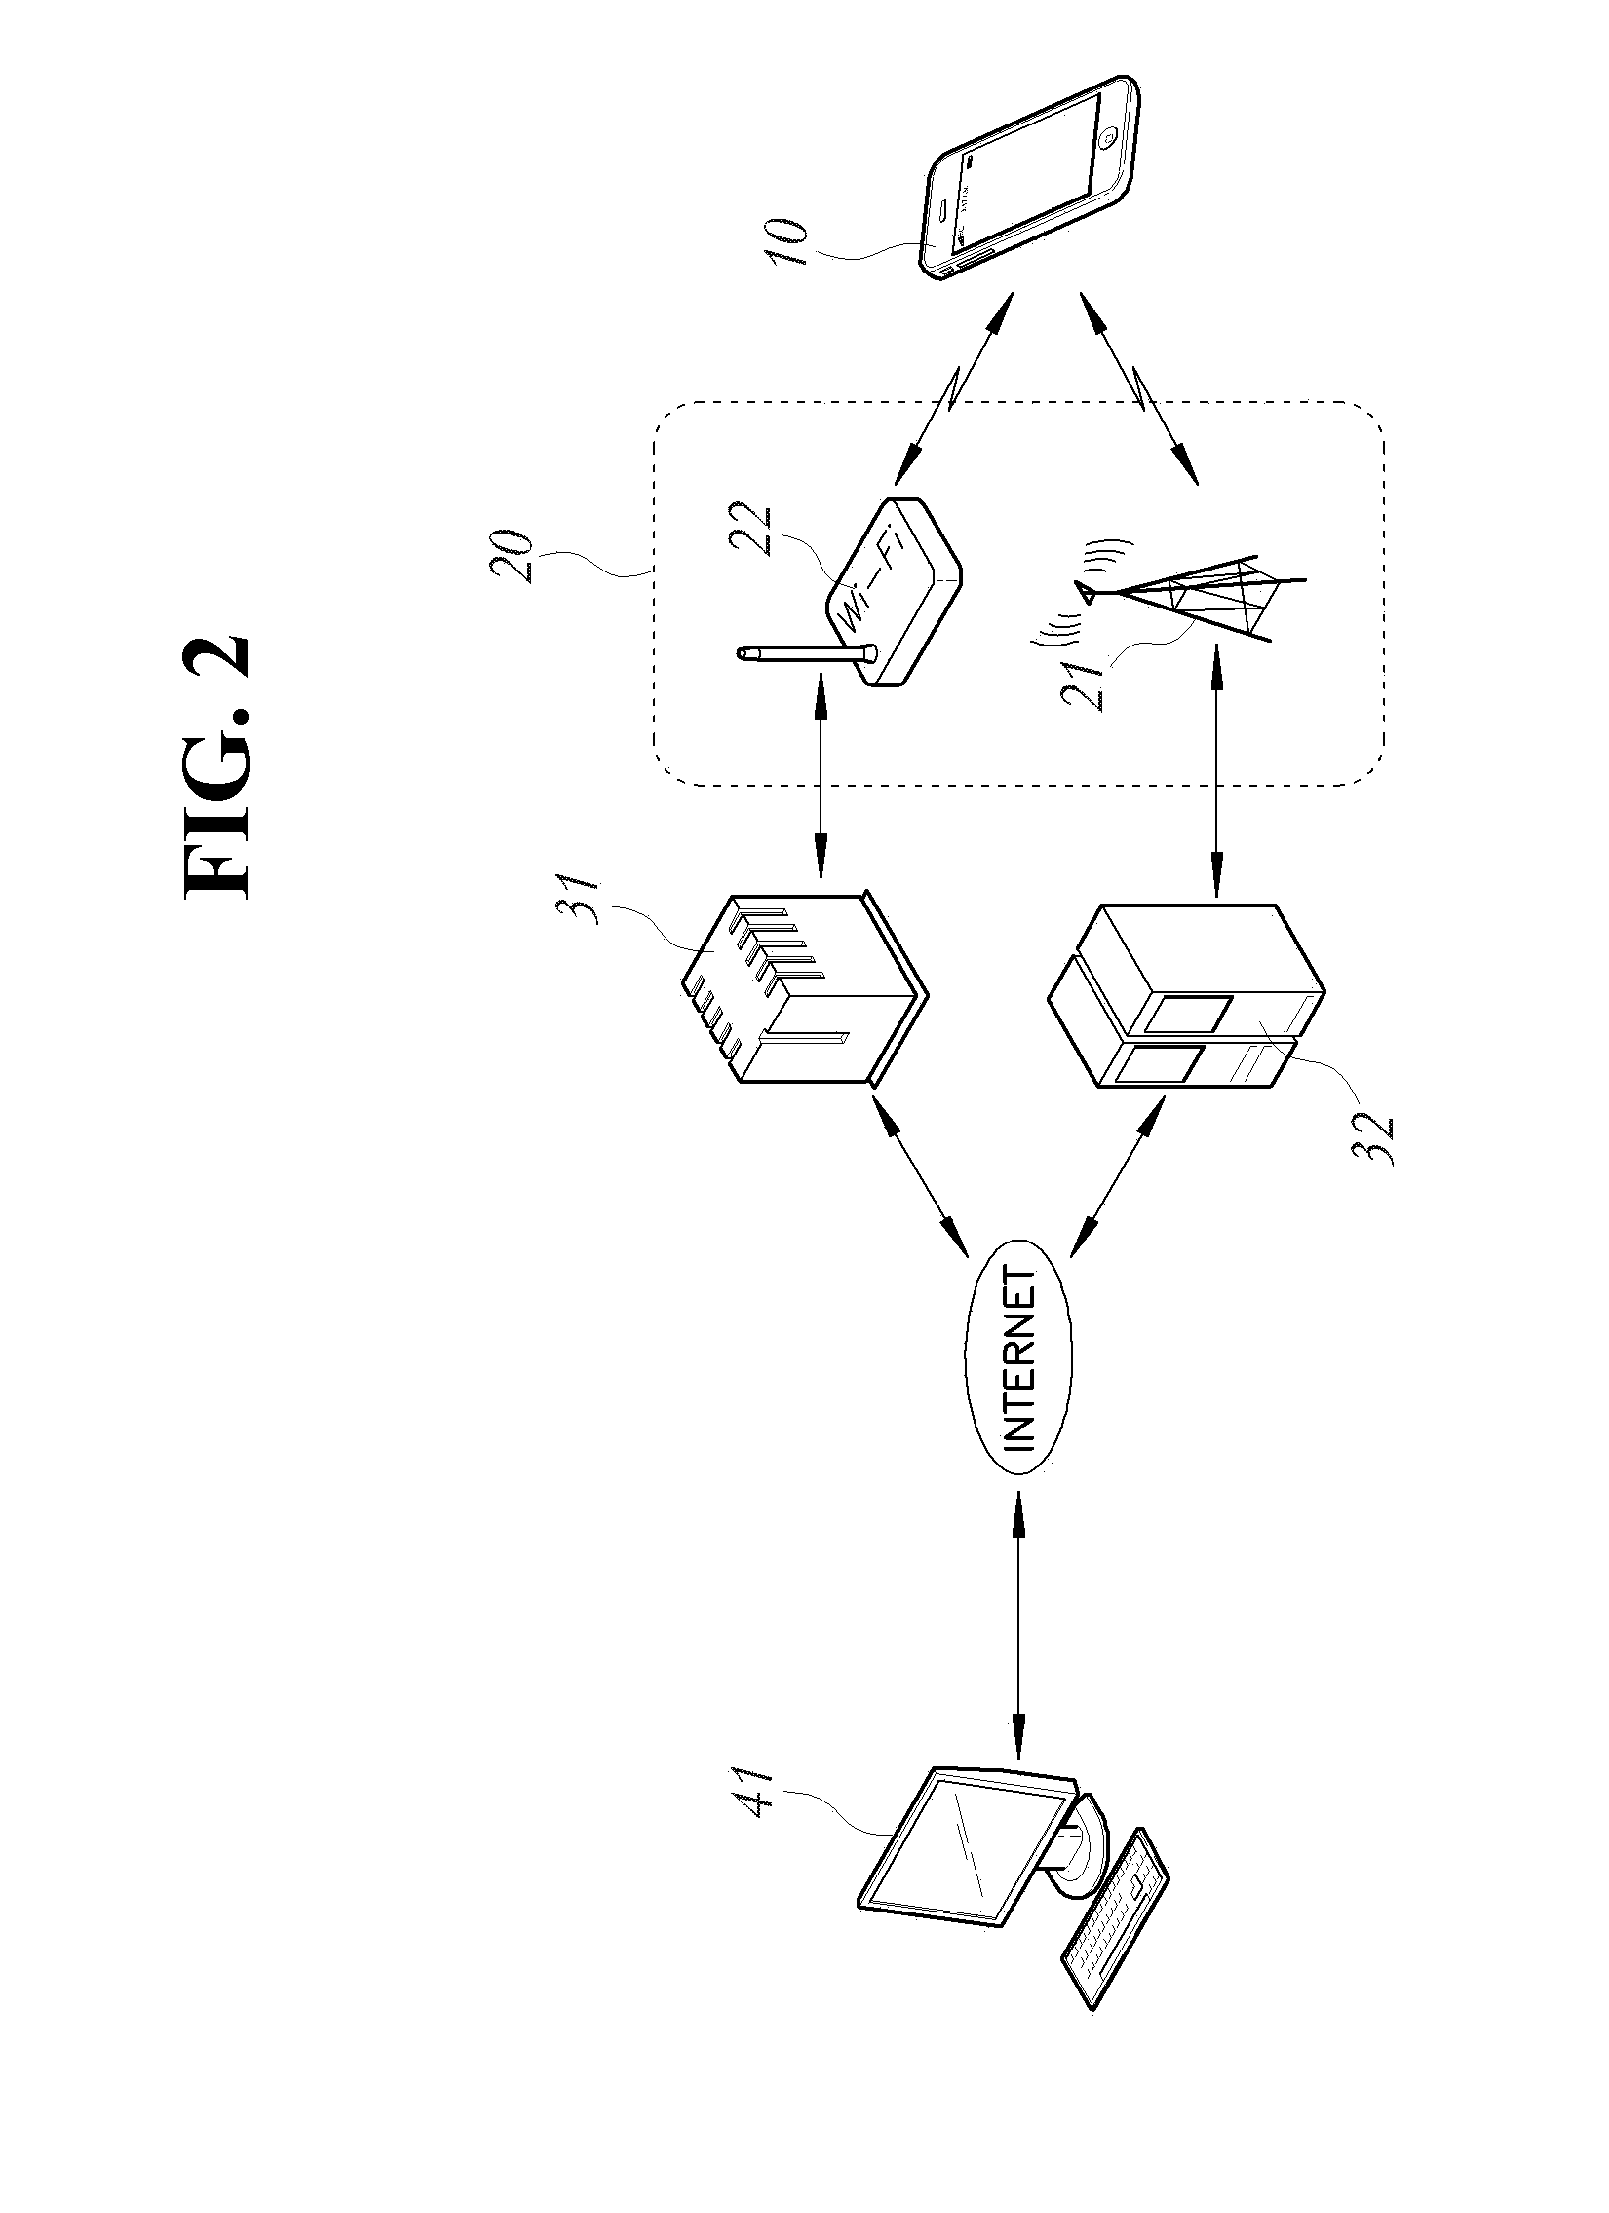 Method of blocking transmission of screen information of mobile communication terminal while performing remote control using registration of alert message in status bar